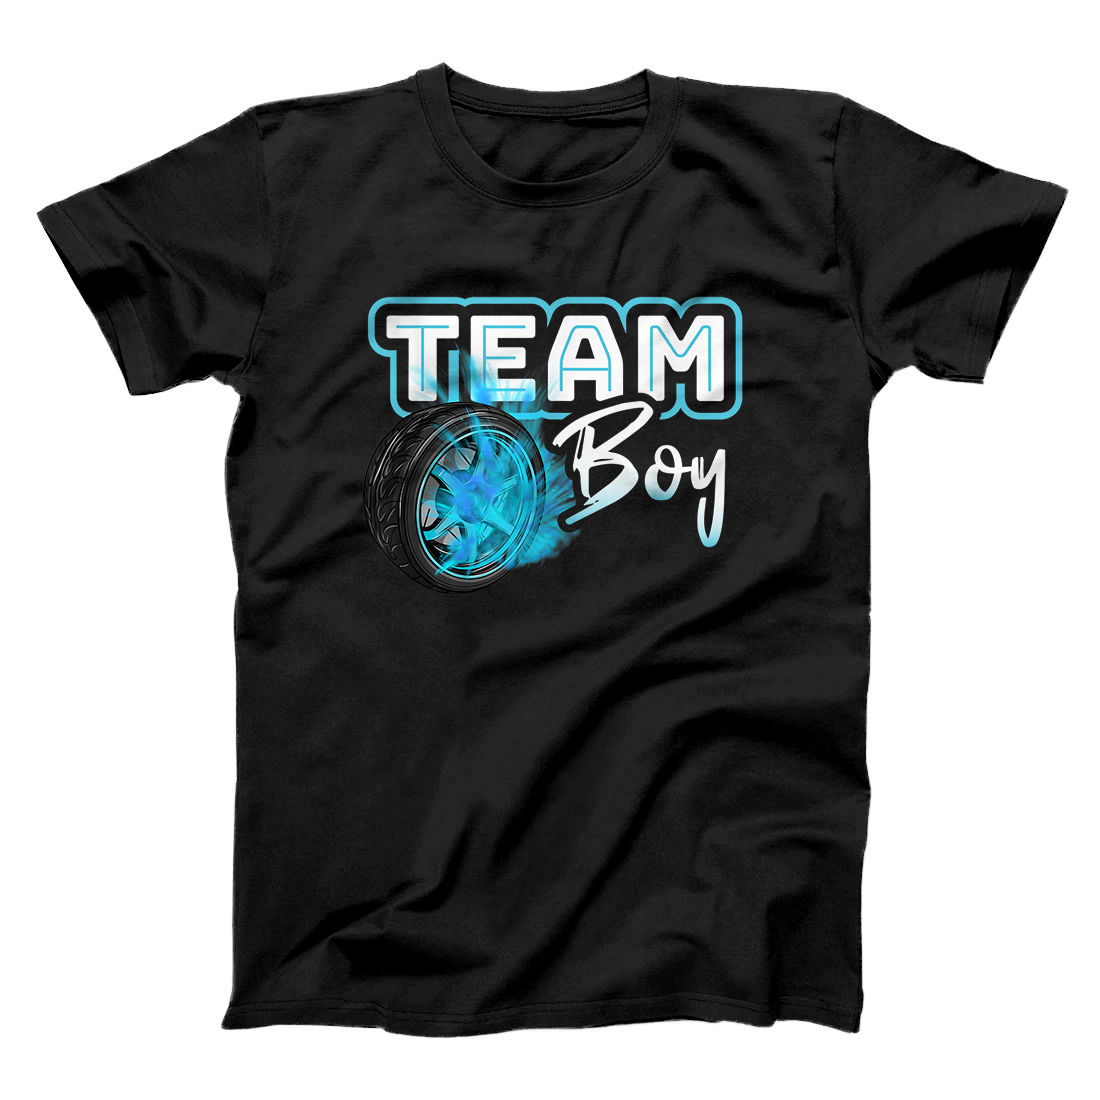 Personalized Gender Reveal Team Boy Burnouts Baby Shower Party Gift Idea T-Shirt